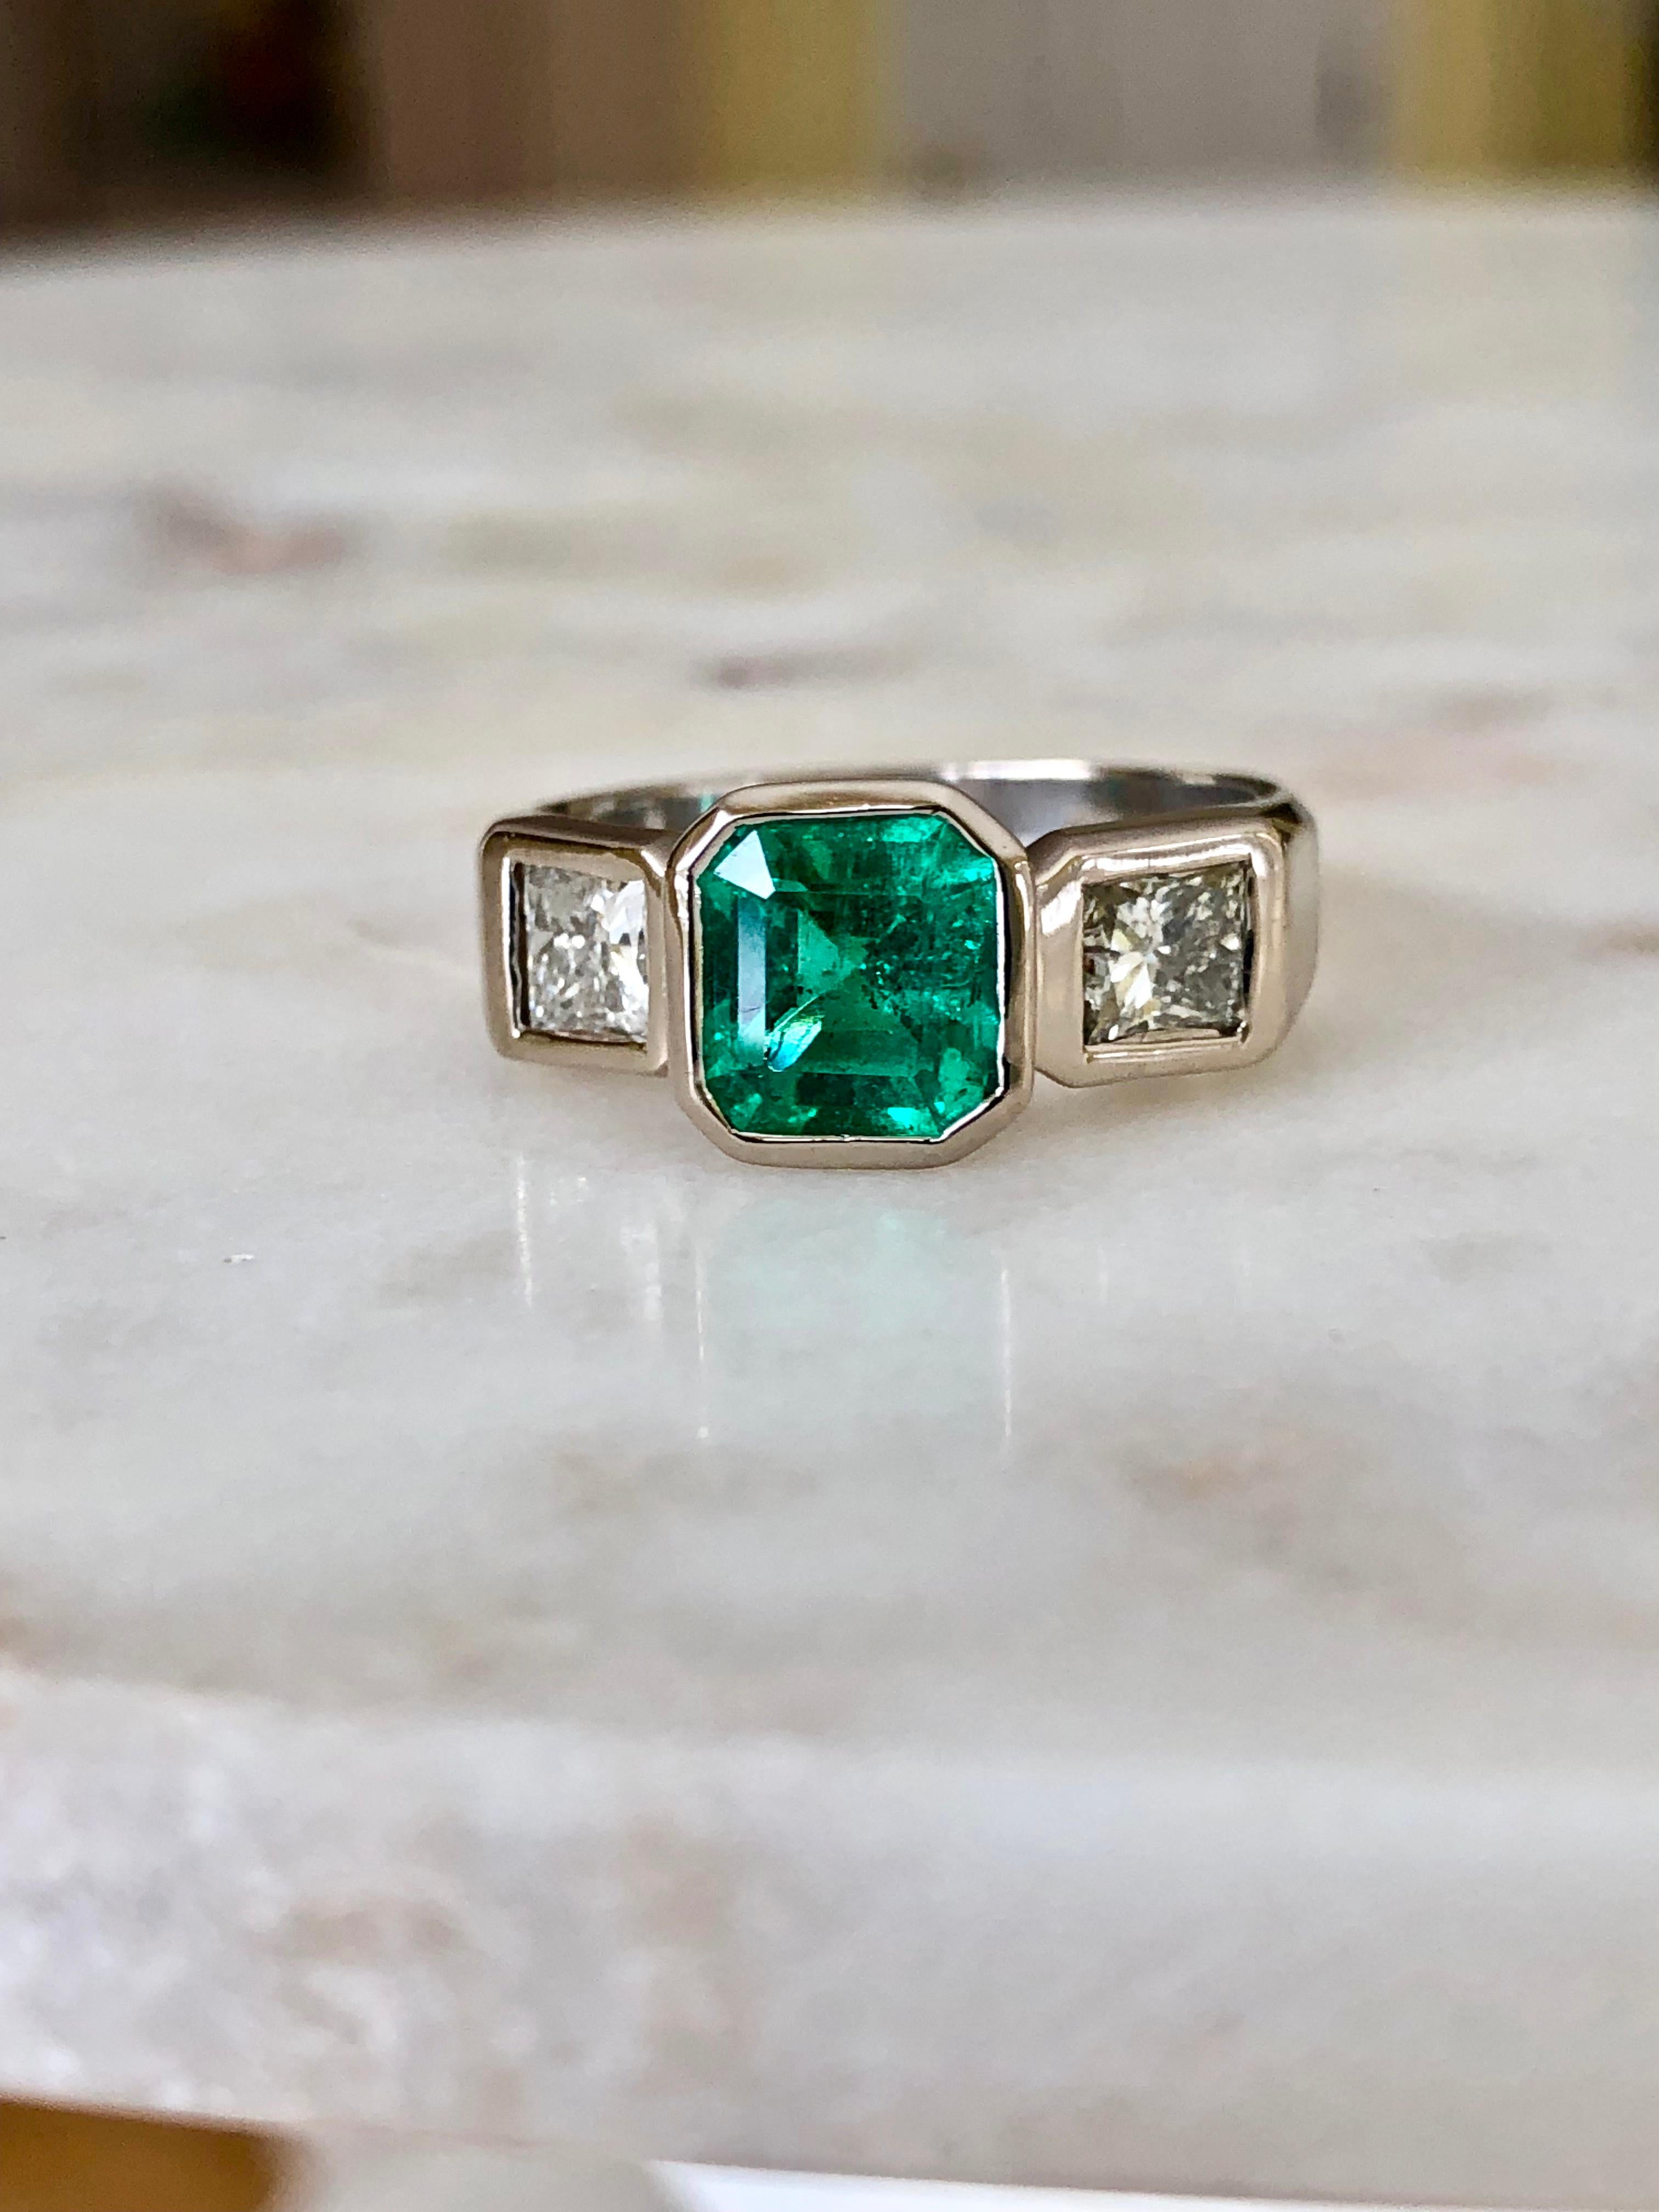 Natural Colombian emerald, diamond and 18K white gold ring, centering 1 bezel-set, emerald-cut, square emerald with bezel-set princess-cut  diamonds. Emerald is beautiful displaying excellent color and clarity.

100% Natural Colombian Emerald AAA